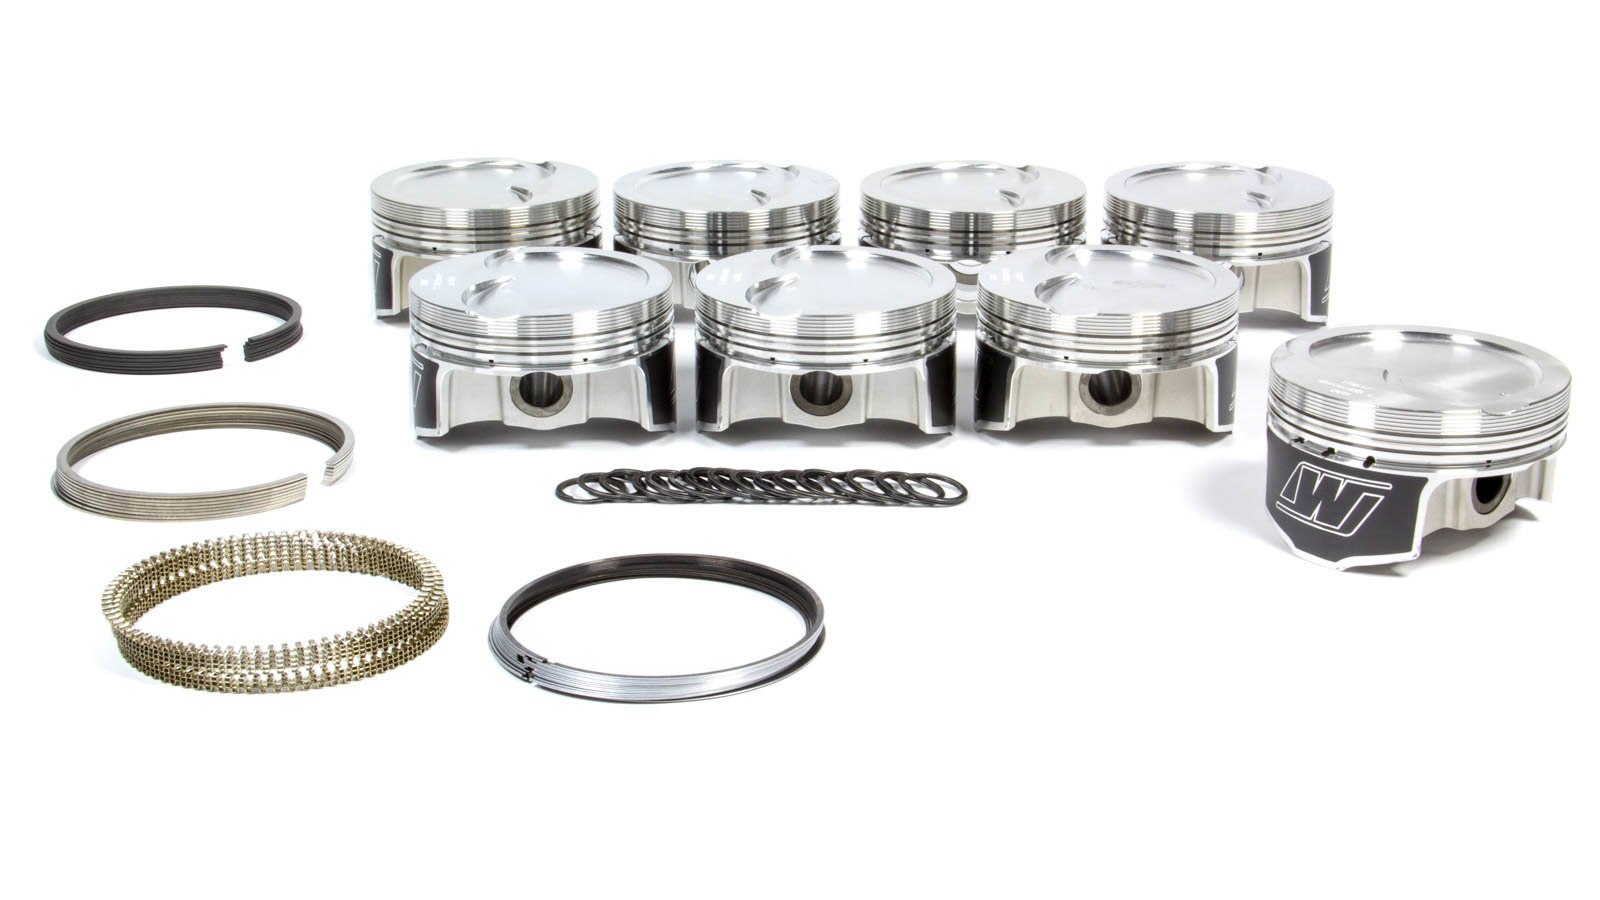 Wiseco Pistons K444X05 Piston and Ring, LS Standard Stroke, Forged, 4.005 in Bore, 1.2 x 1.2 x 3.0 mm Ring Groove, Minus 11.00 cc, GM LS-Series, Kit